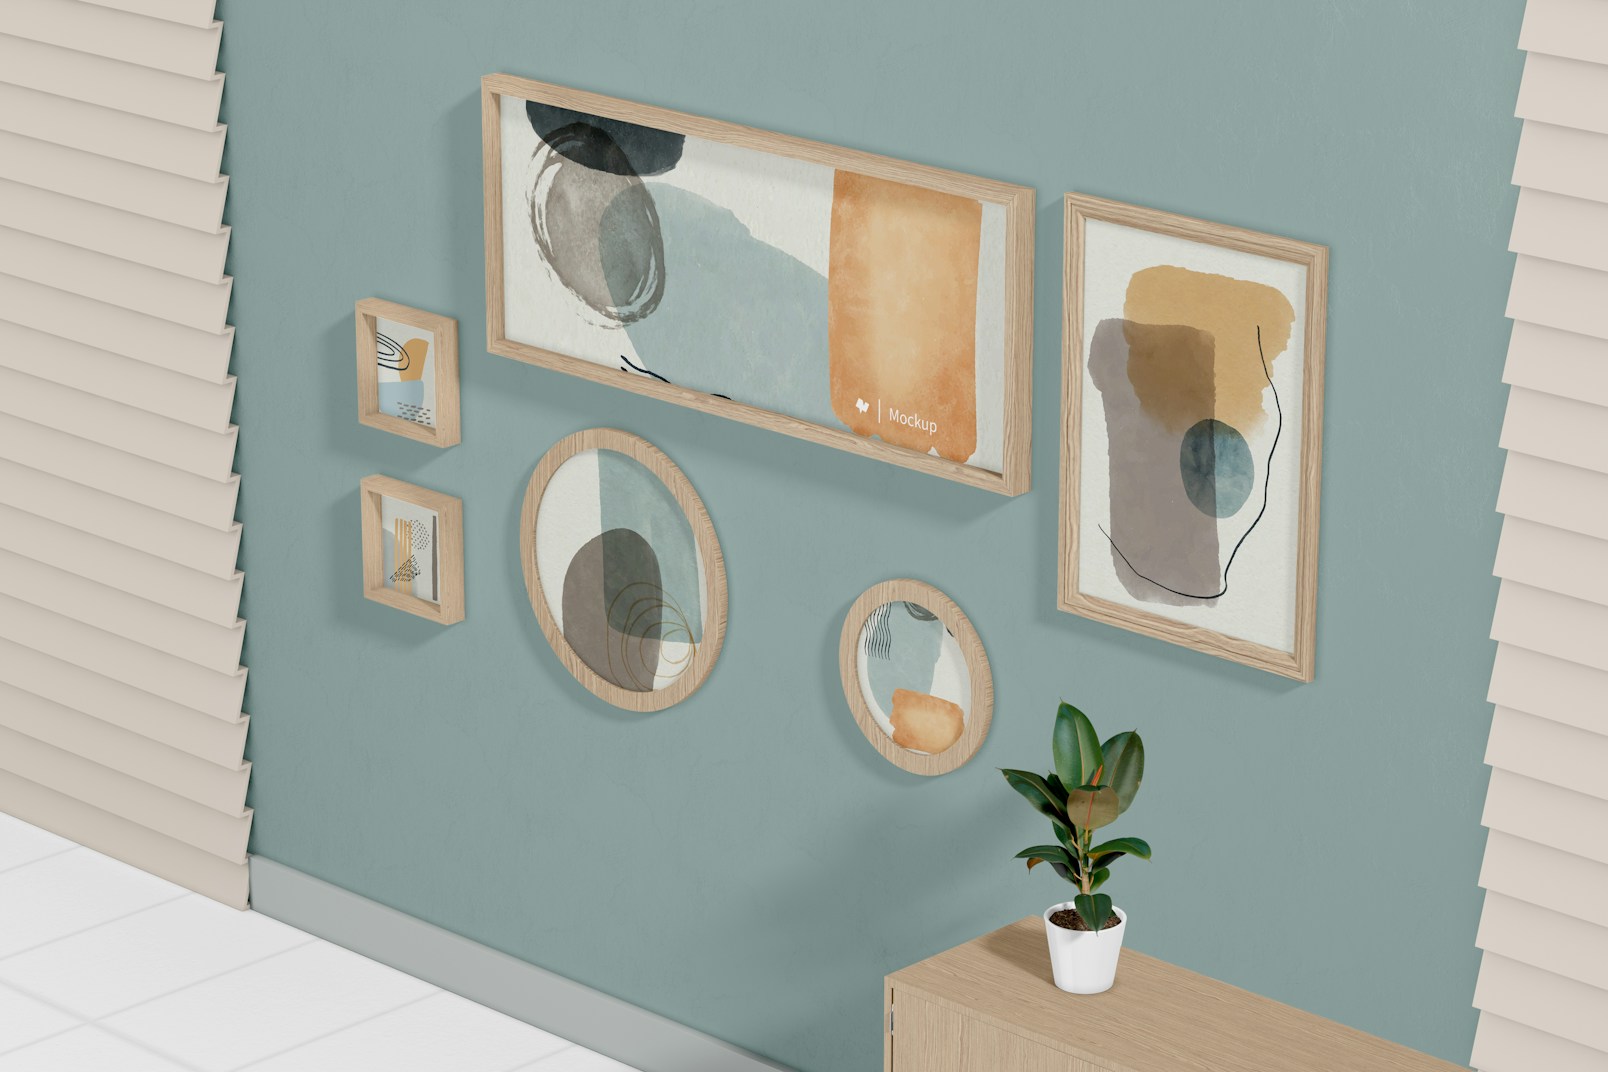 Gallery Frames Mockup, with Large Sideboard